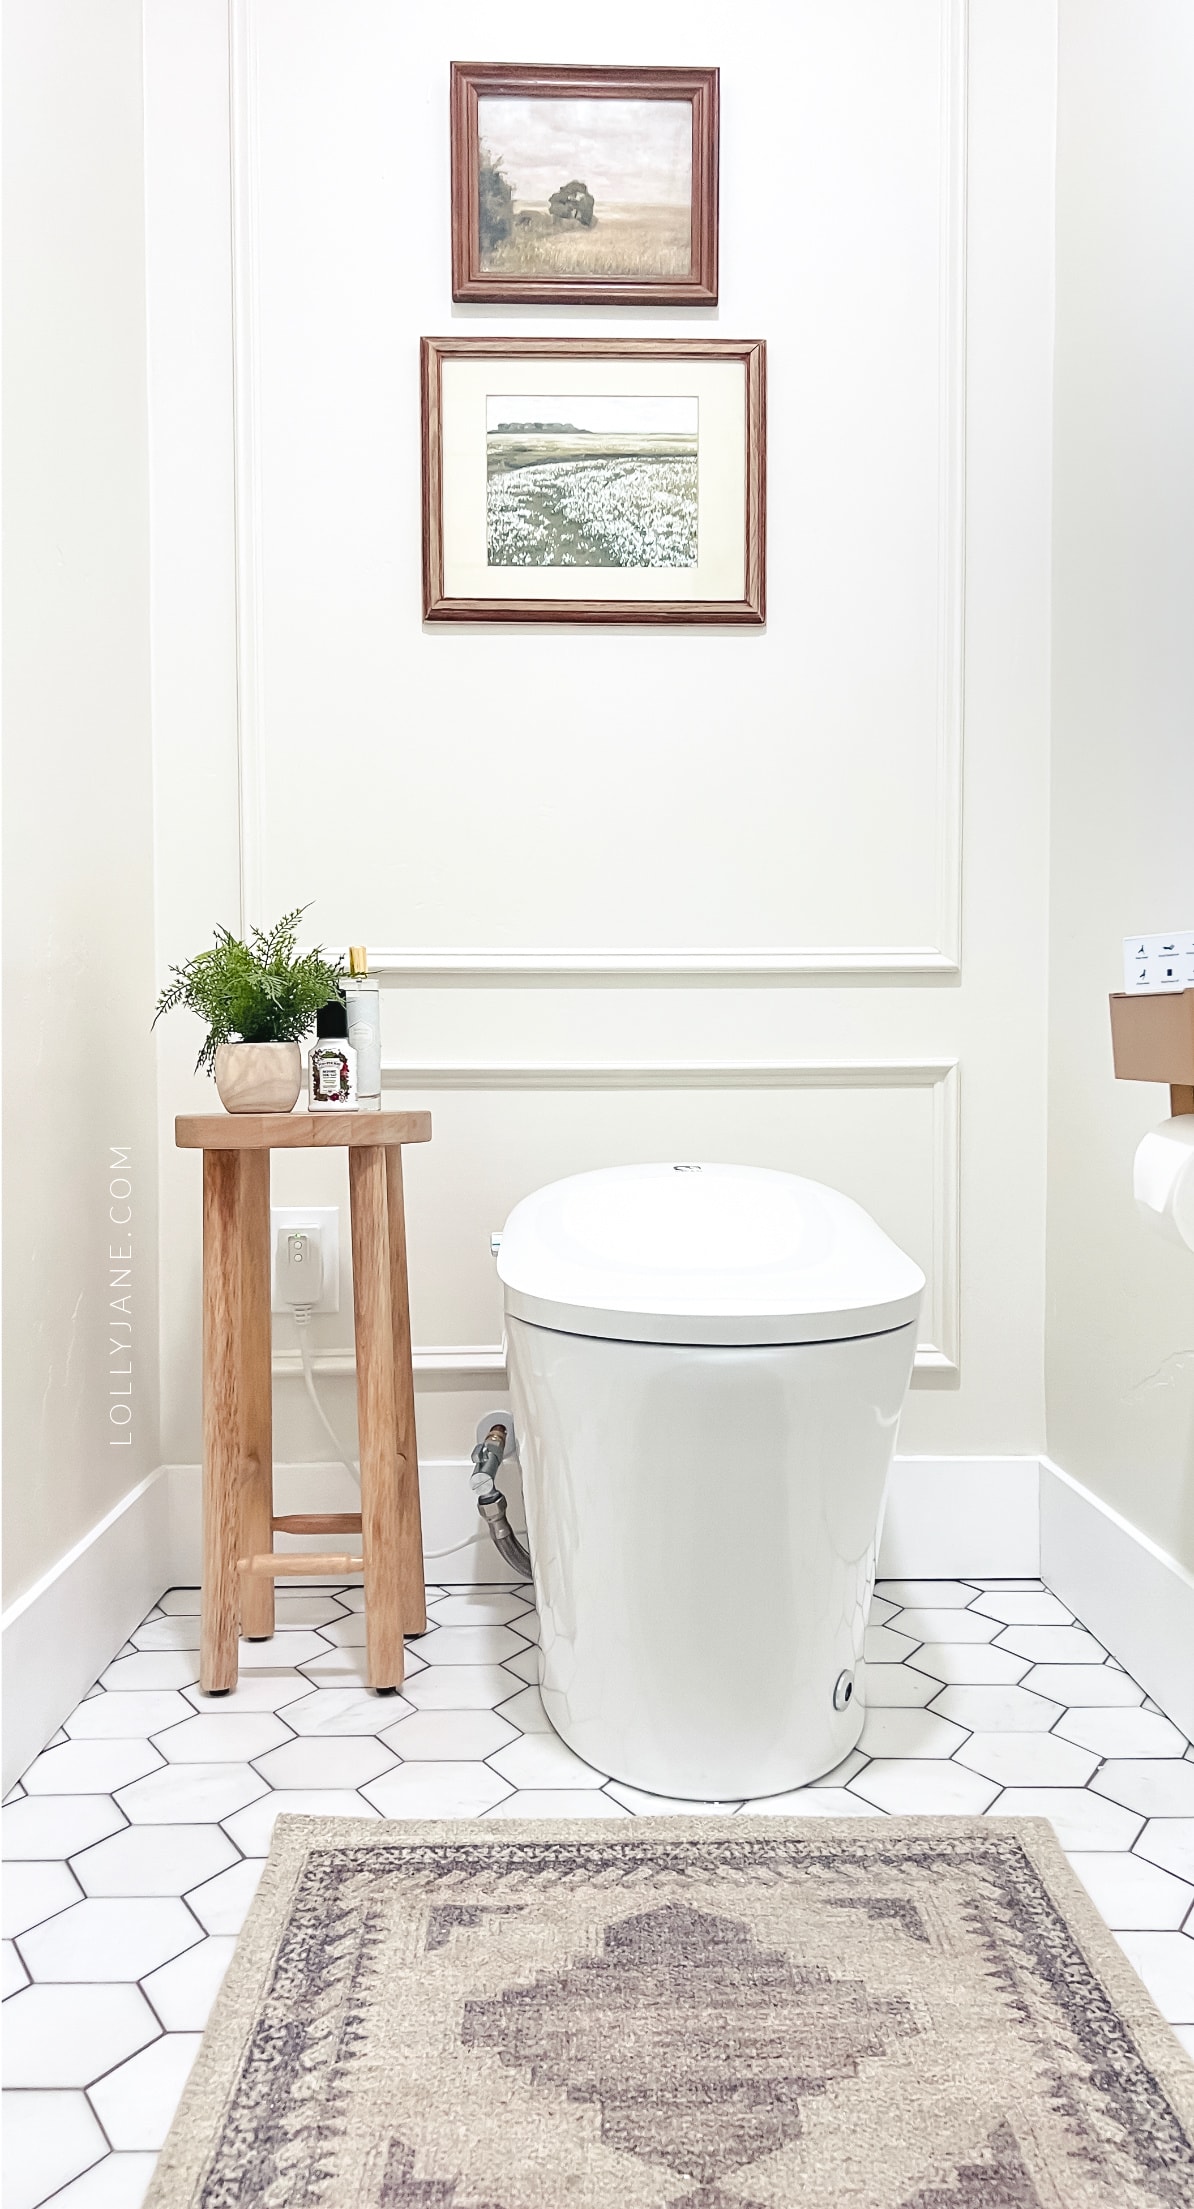 How to transform a dark toilet room into a bright and airy, elevated water closet using natural artwork, wood frames and an easy wainscot wall treatment.